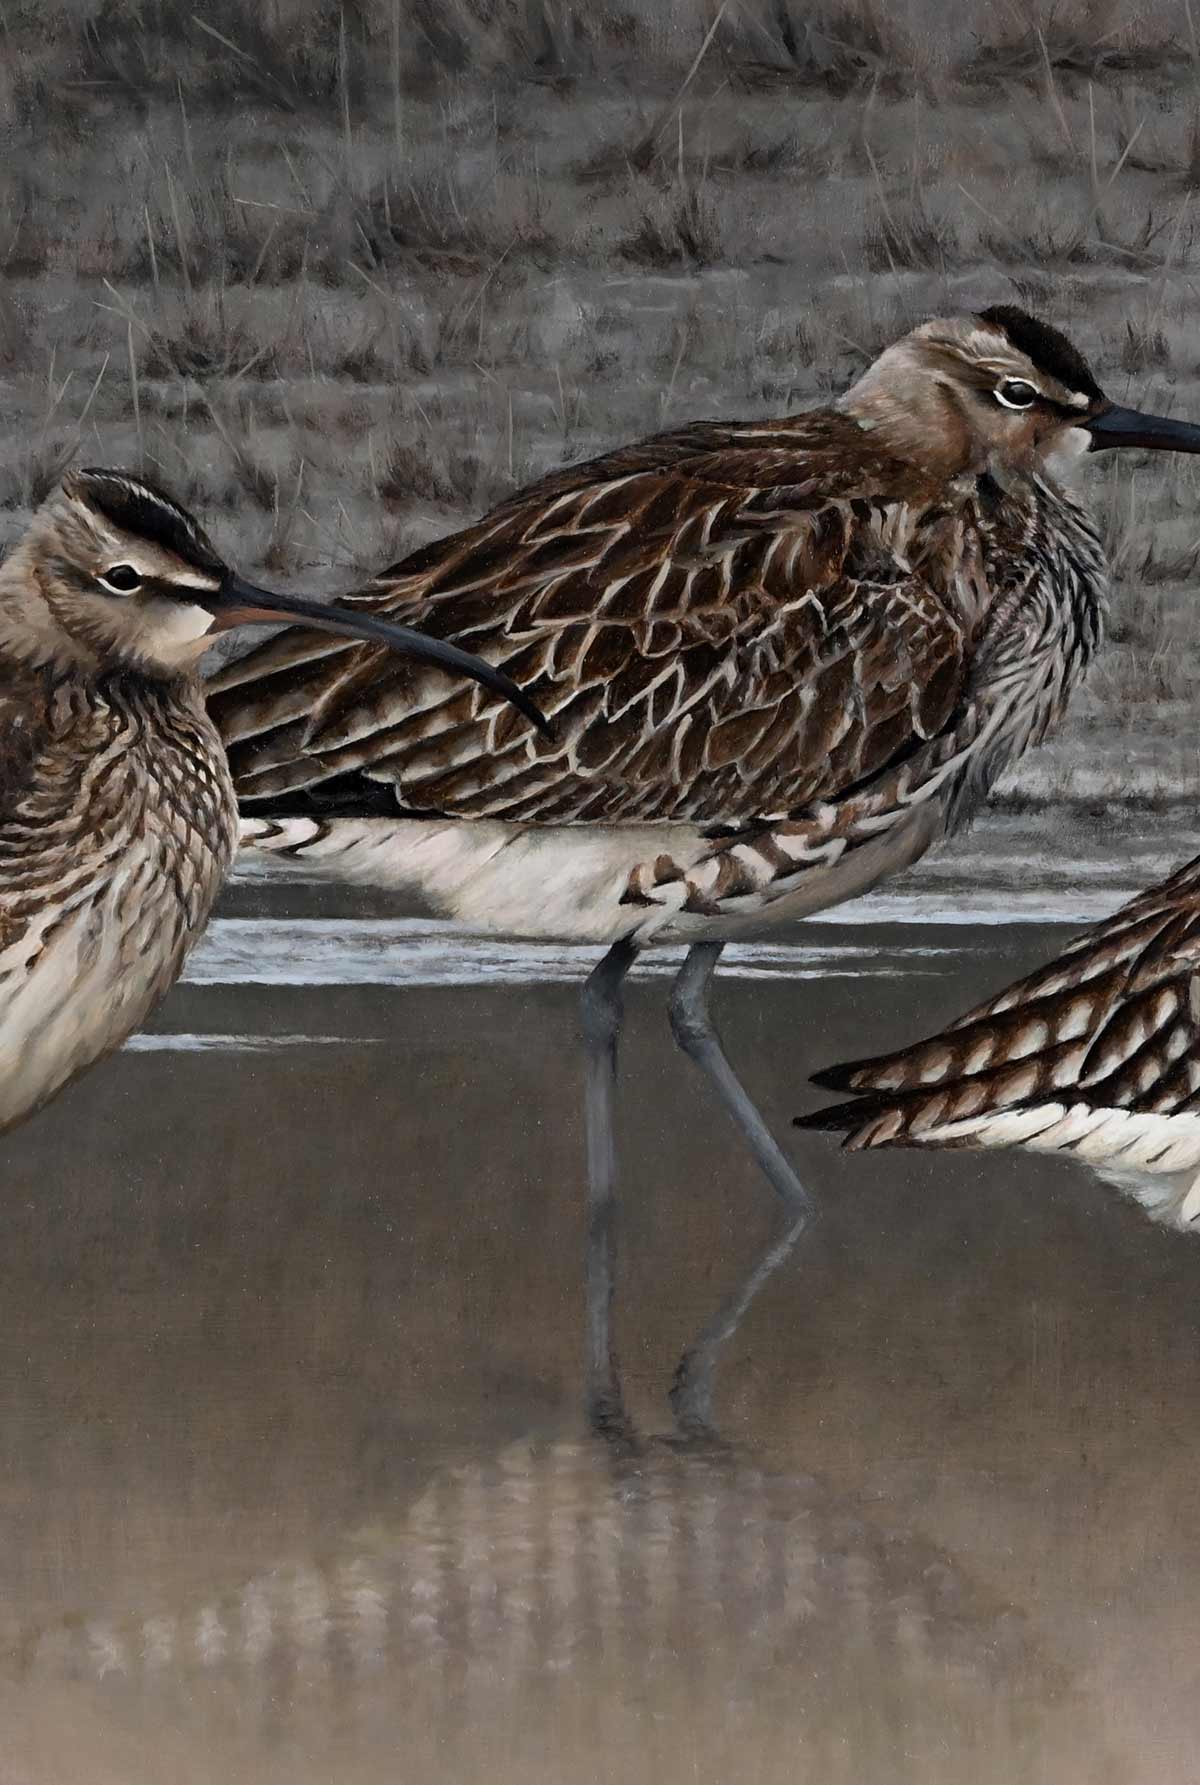 Whimbrels - Heading North - An Original Oil Painting By Bird Artist Chris Lodge